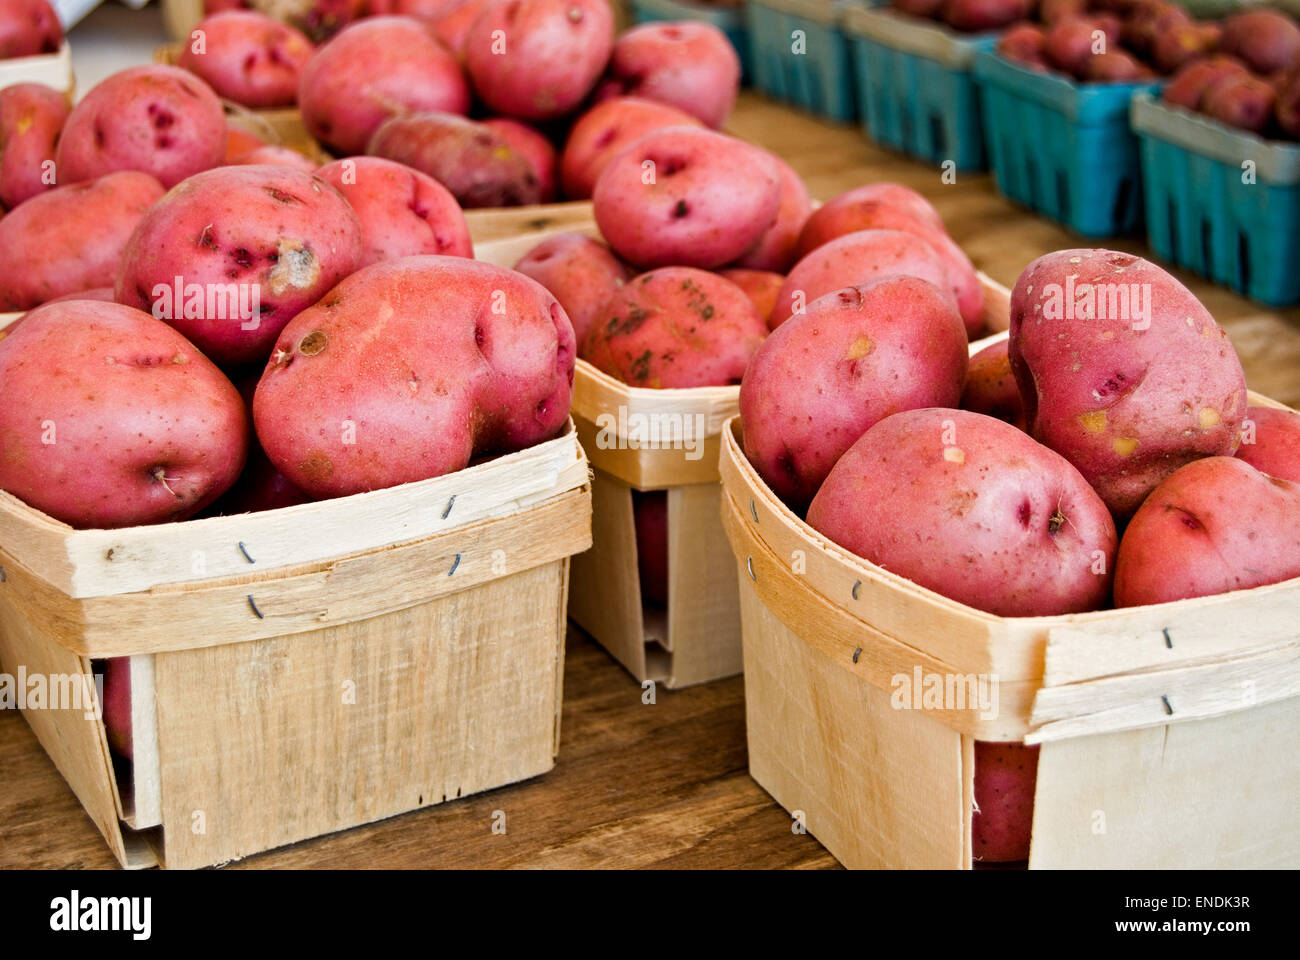 Red potatoes in wooden produce boxes. Stock Photo